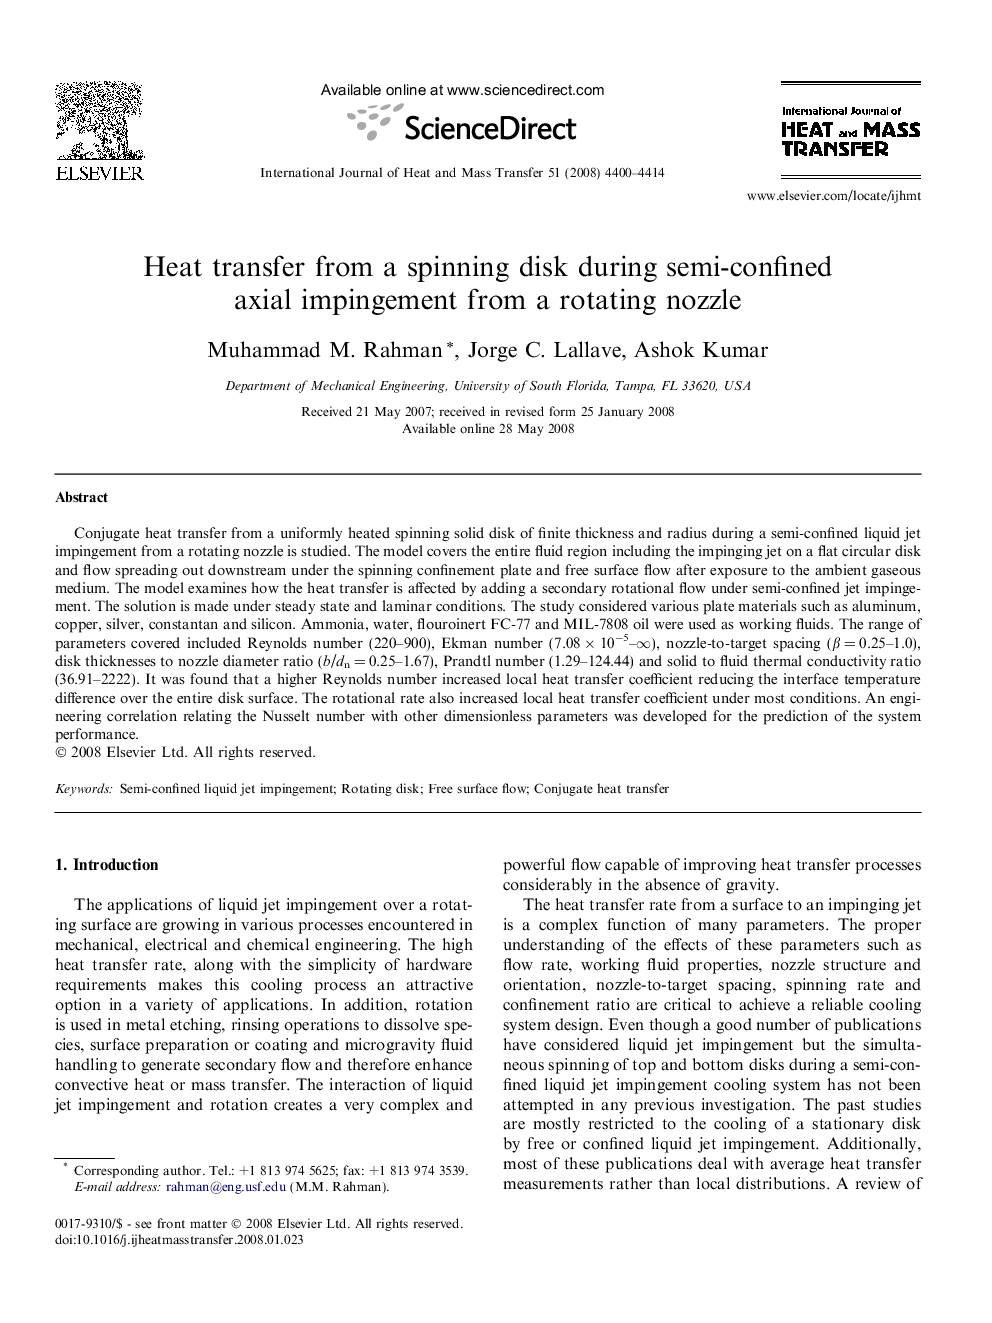 Heat transfer from a spinning disk during semi-confined axial impingement from a rotating nozzle